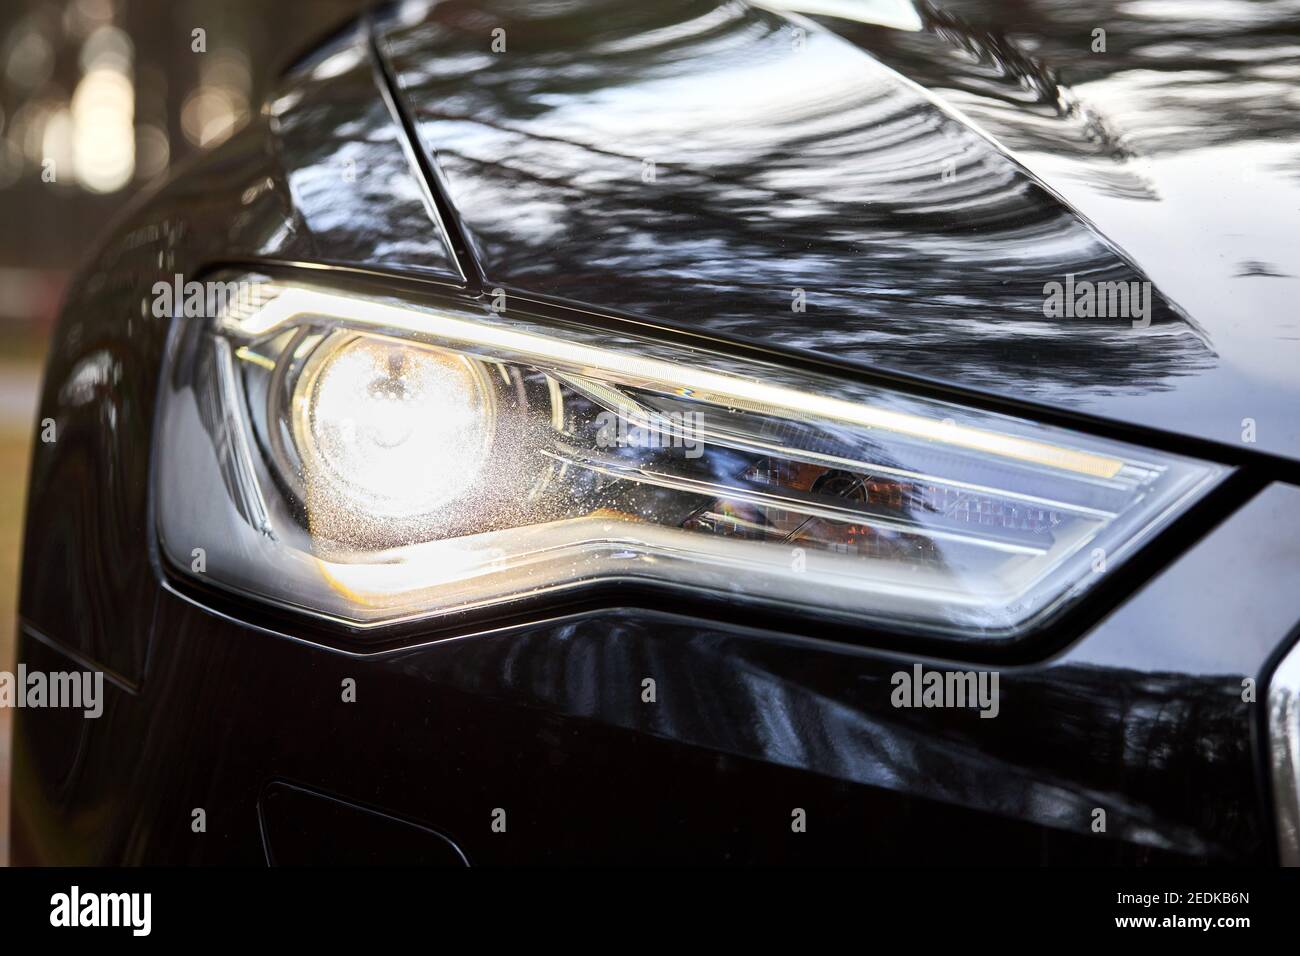 GRODNO, BELARUS - DECEMBER 2019: Audi A6 4G C7 Luxury Black car parts right  front headlight and fog light with part of bumper closeup selected focus  Stock Photo - Alamy